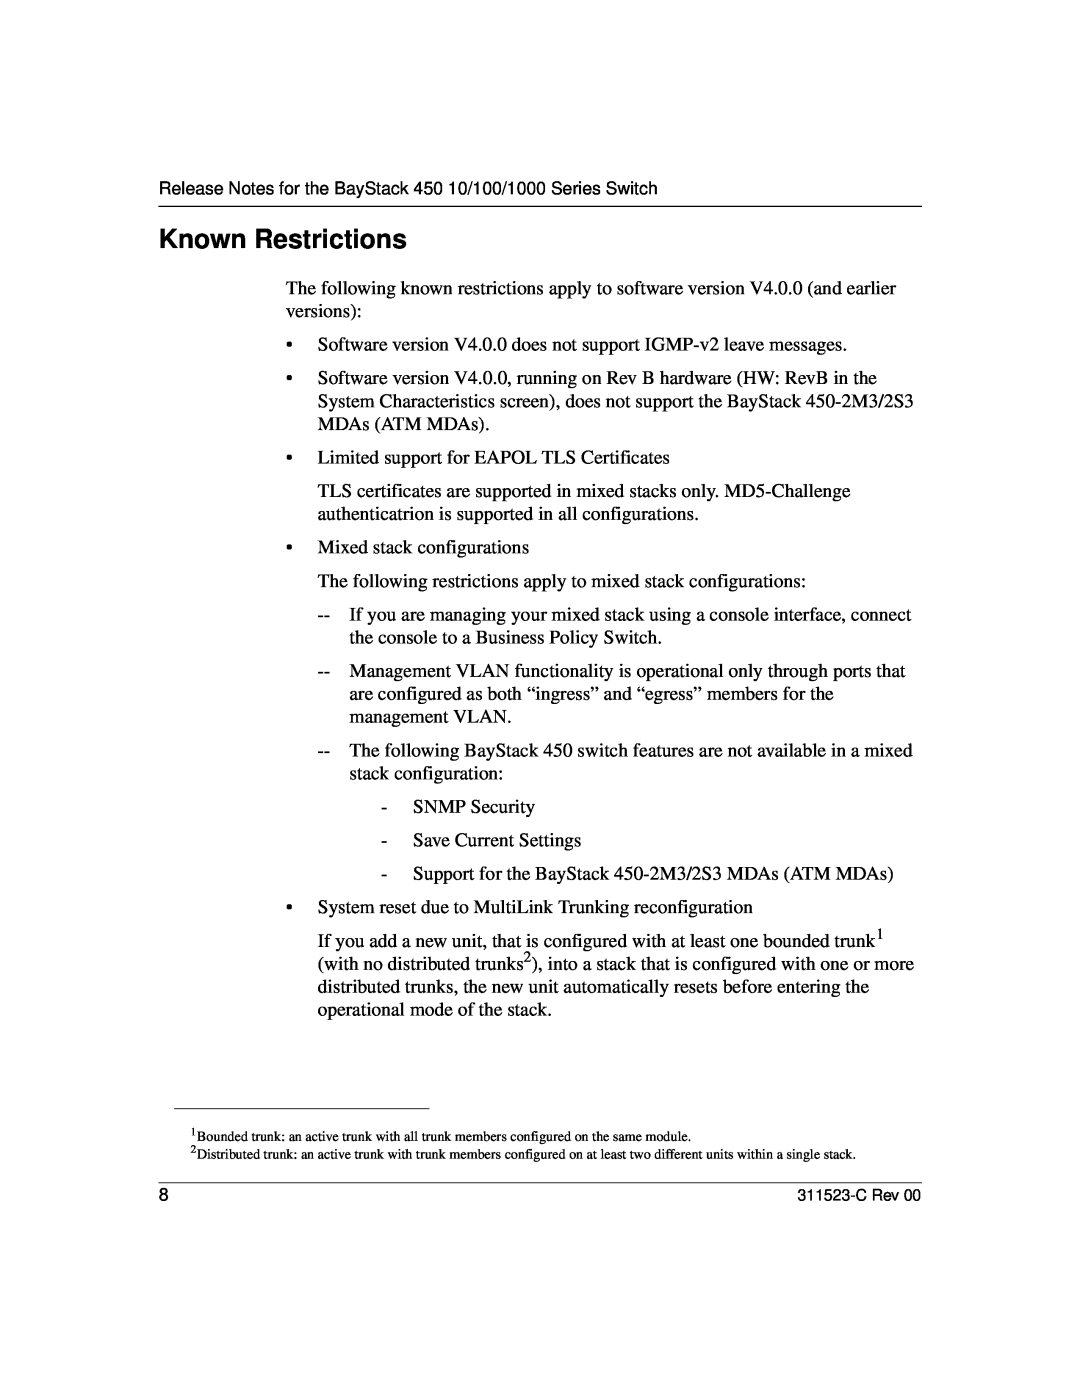 Nortel Networks 100 manual Known Restrictions 